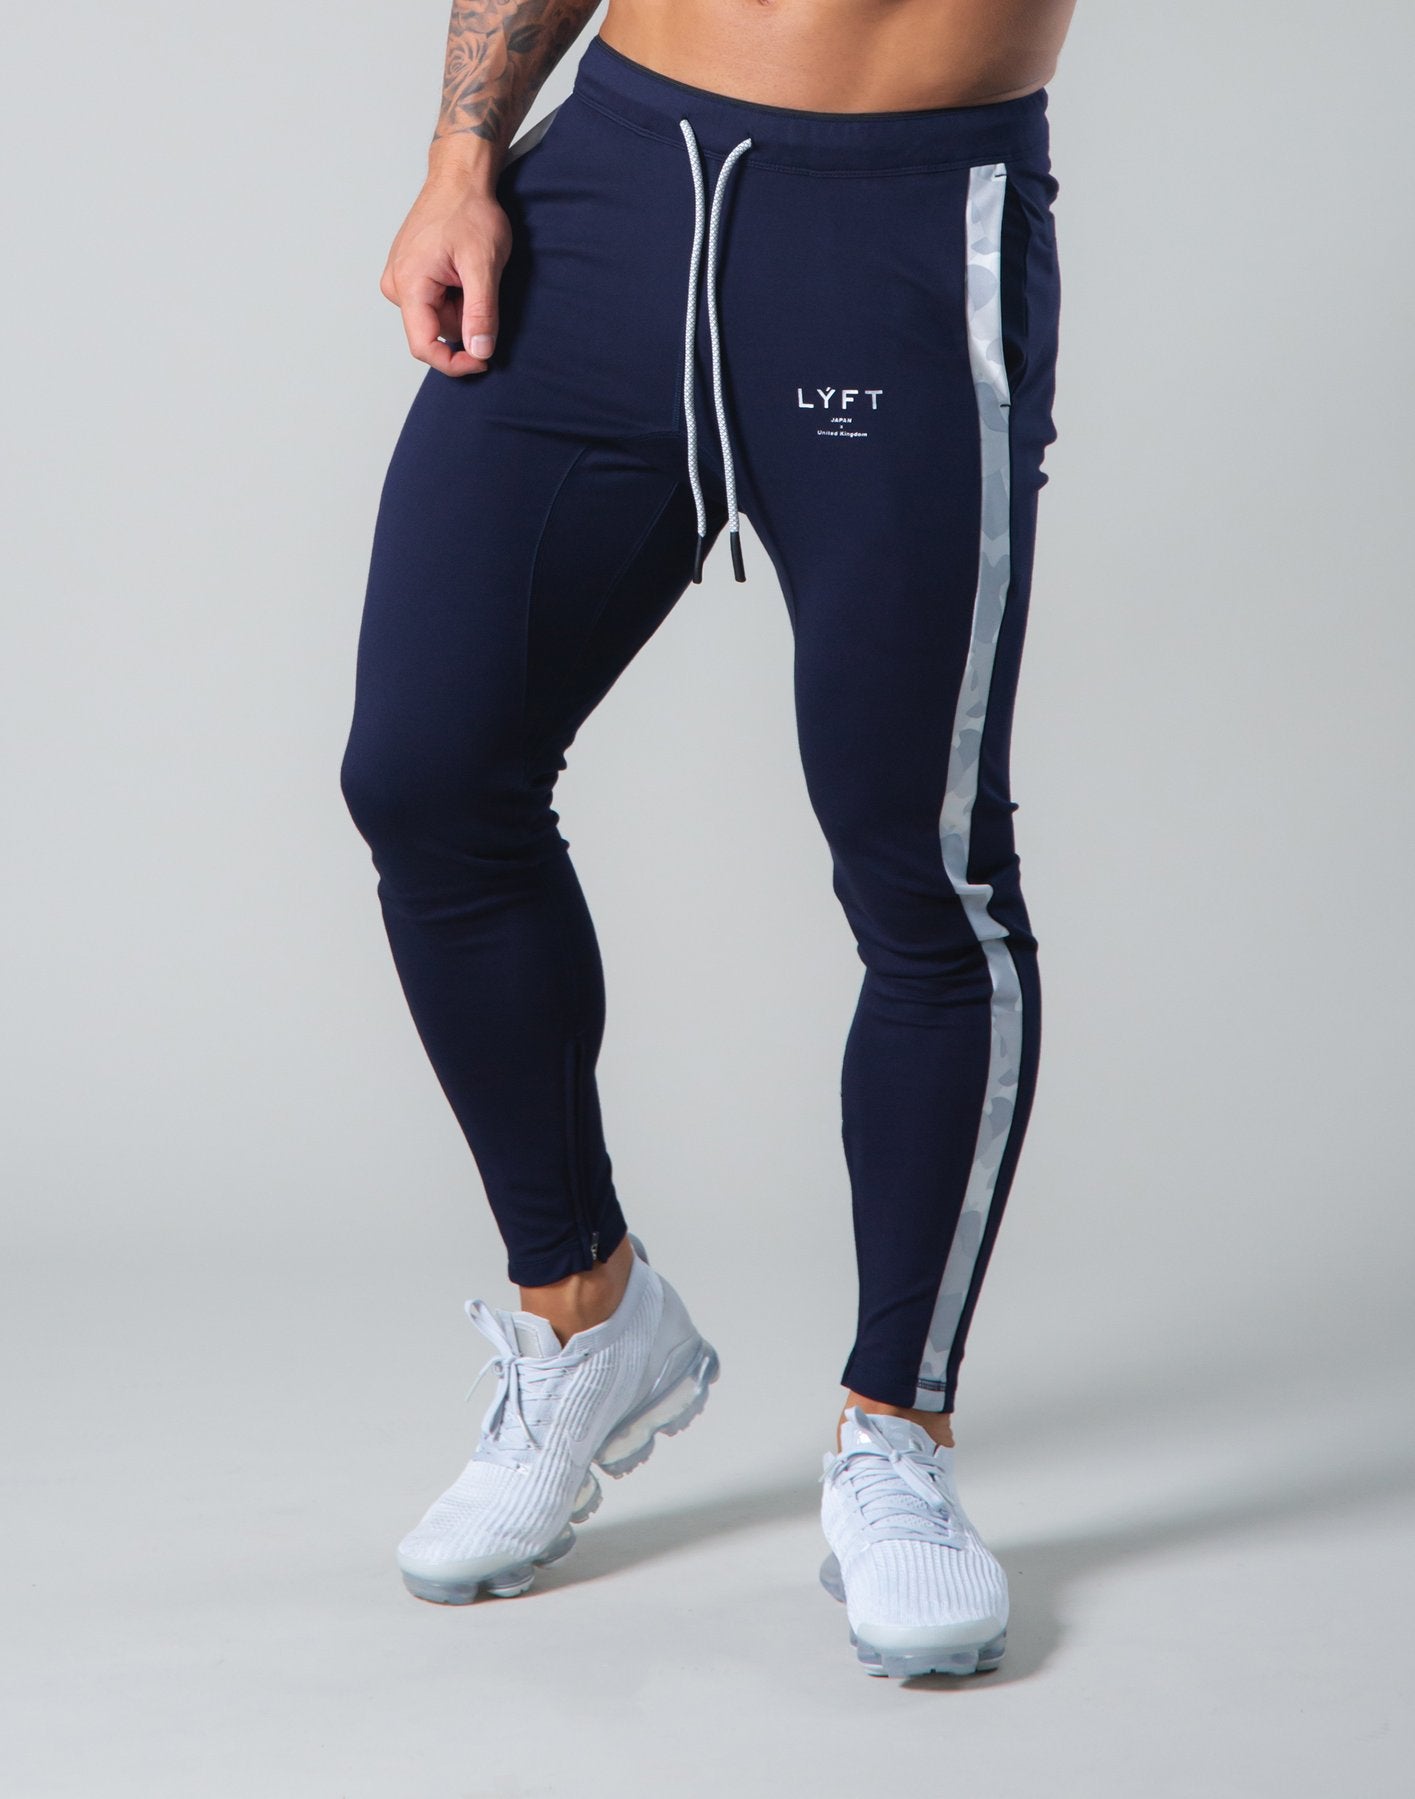 Men's Autumn New Muscle Brothers Running Fitness Cotton Trousers Casual Sports Footwear One Drop